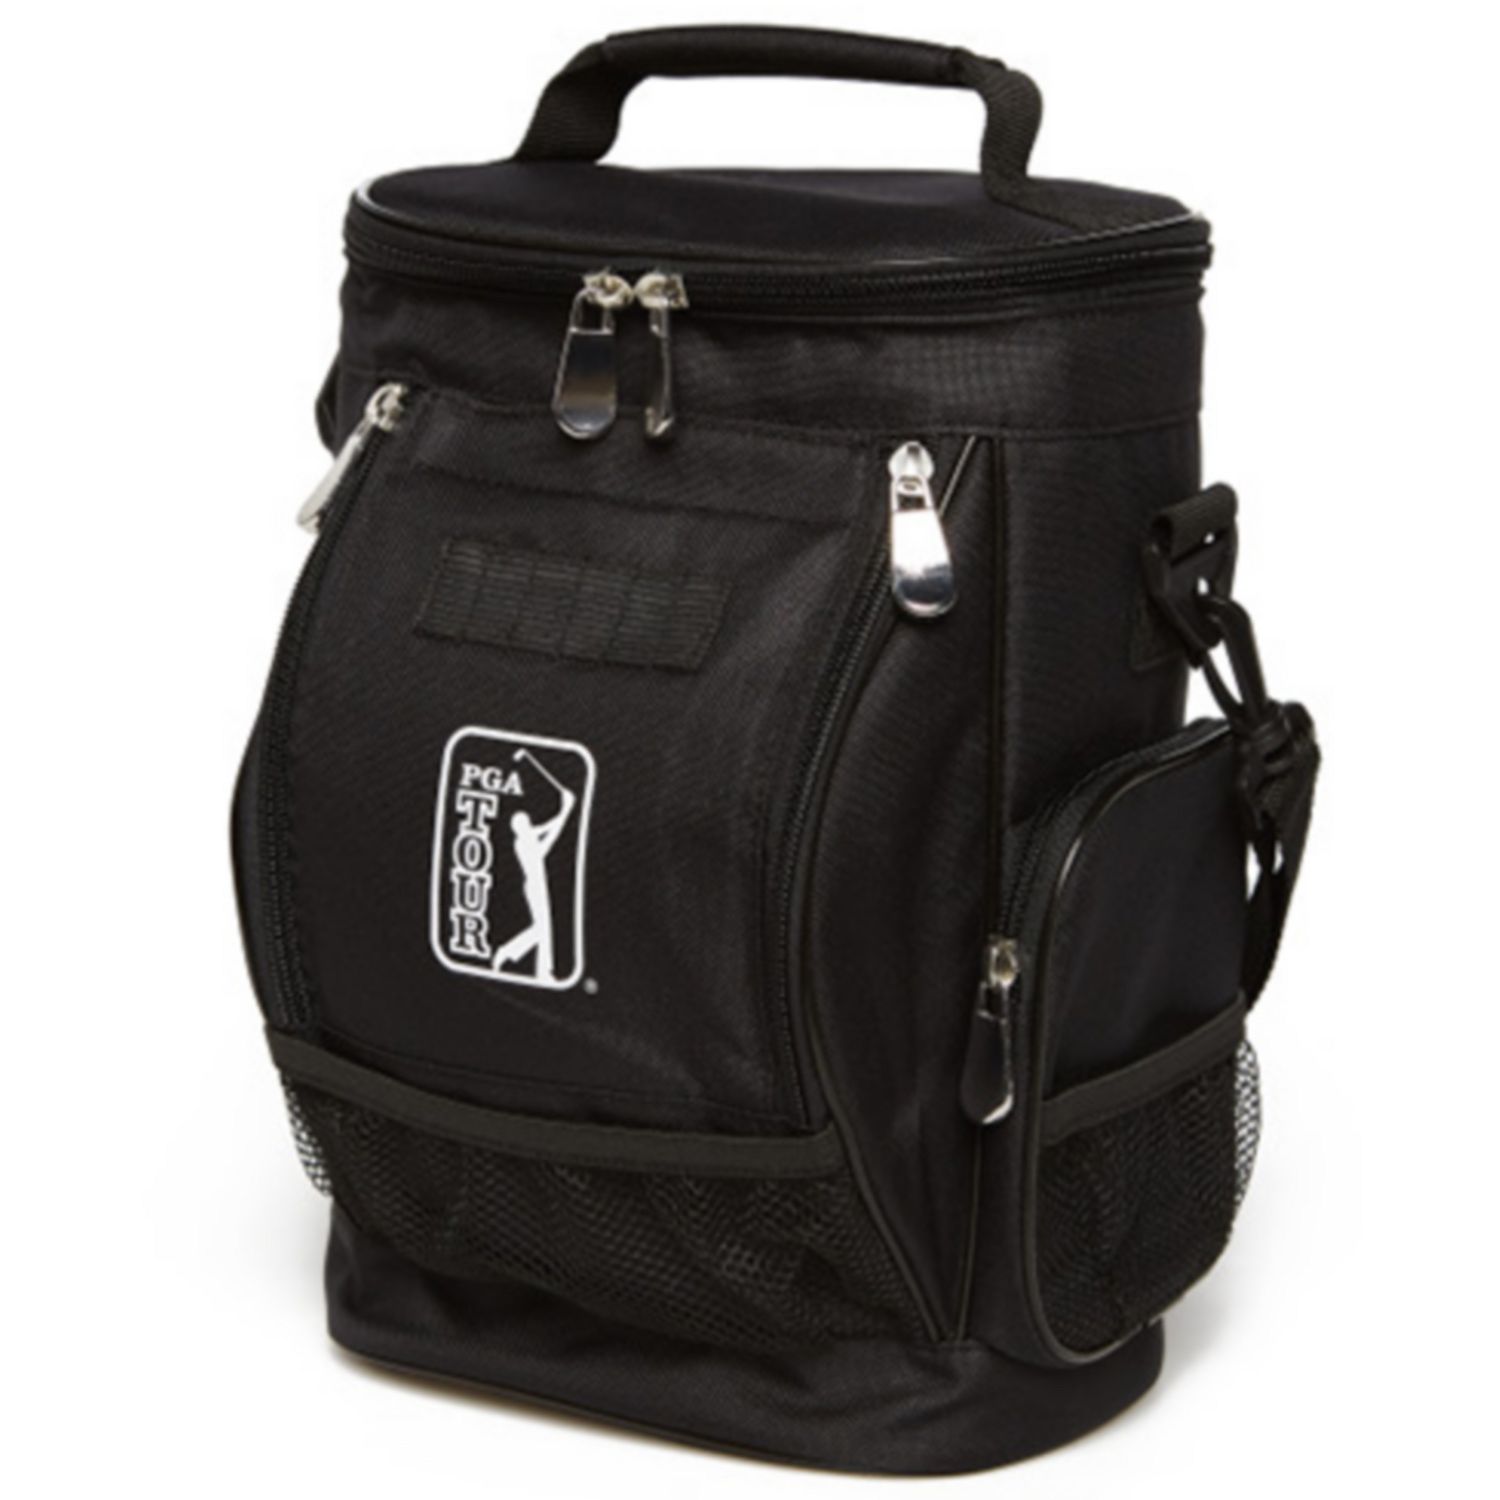 10-Can PGA Tour Insulated Cooler Bag (Black) $9.96 + Free Store Pickup at Macy's or F/S on $25+